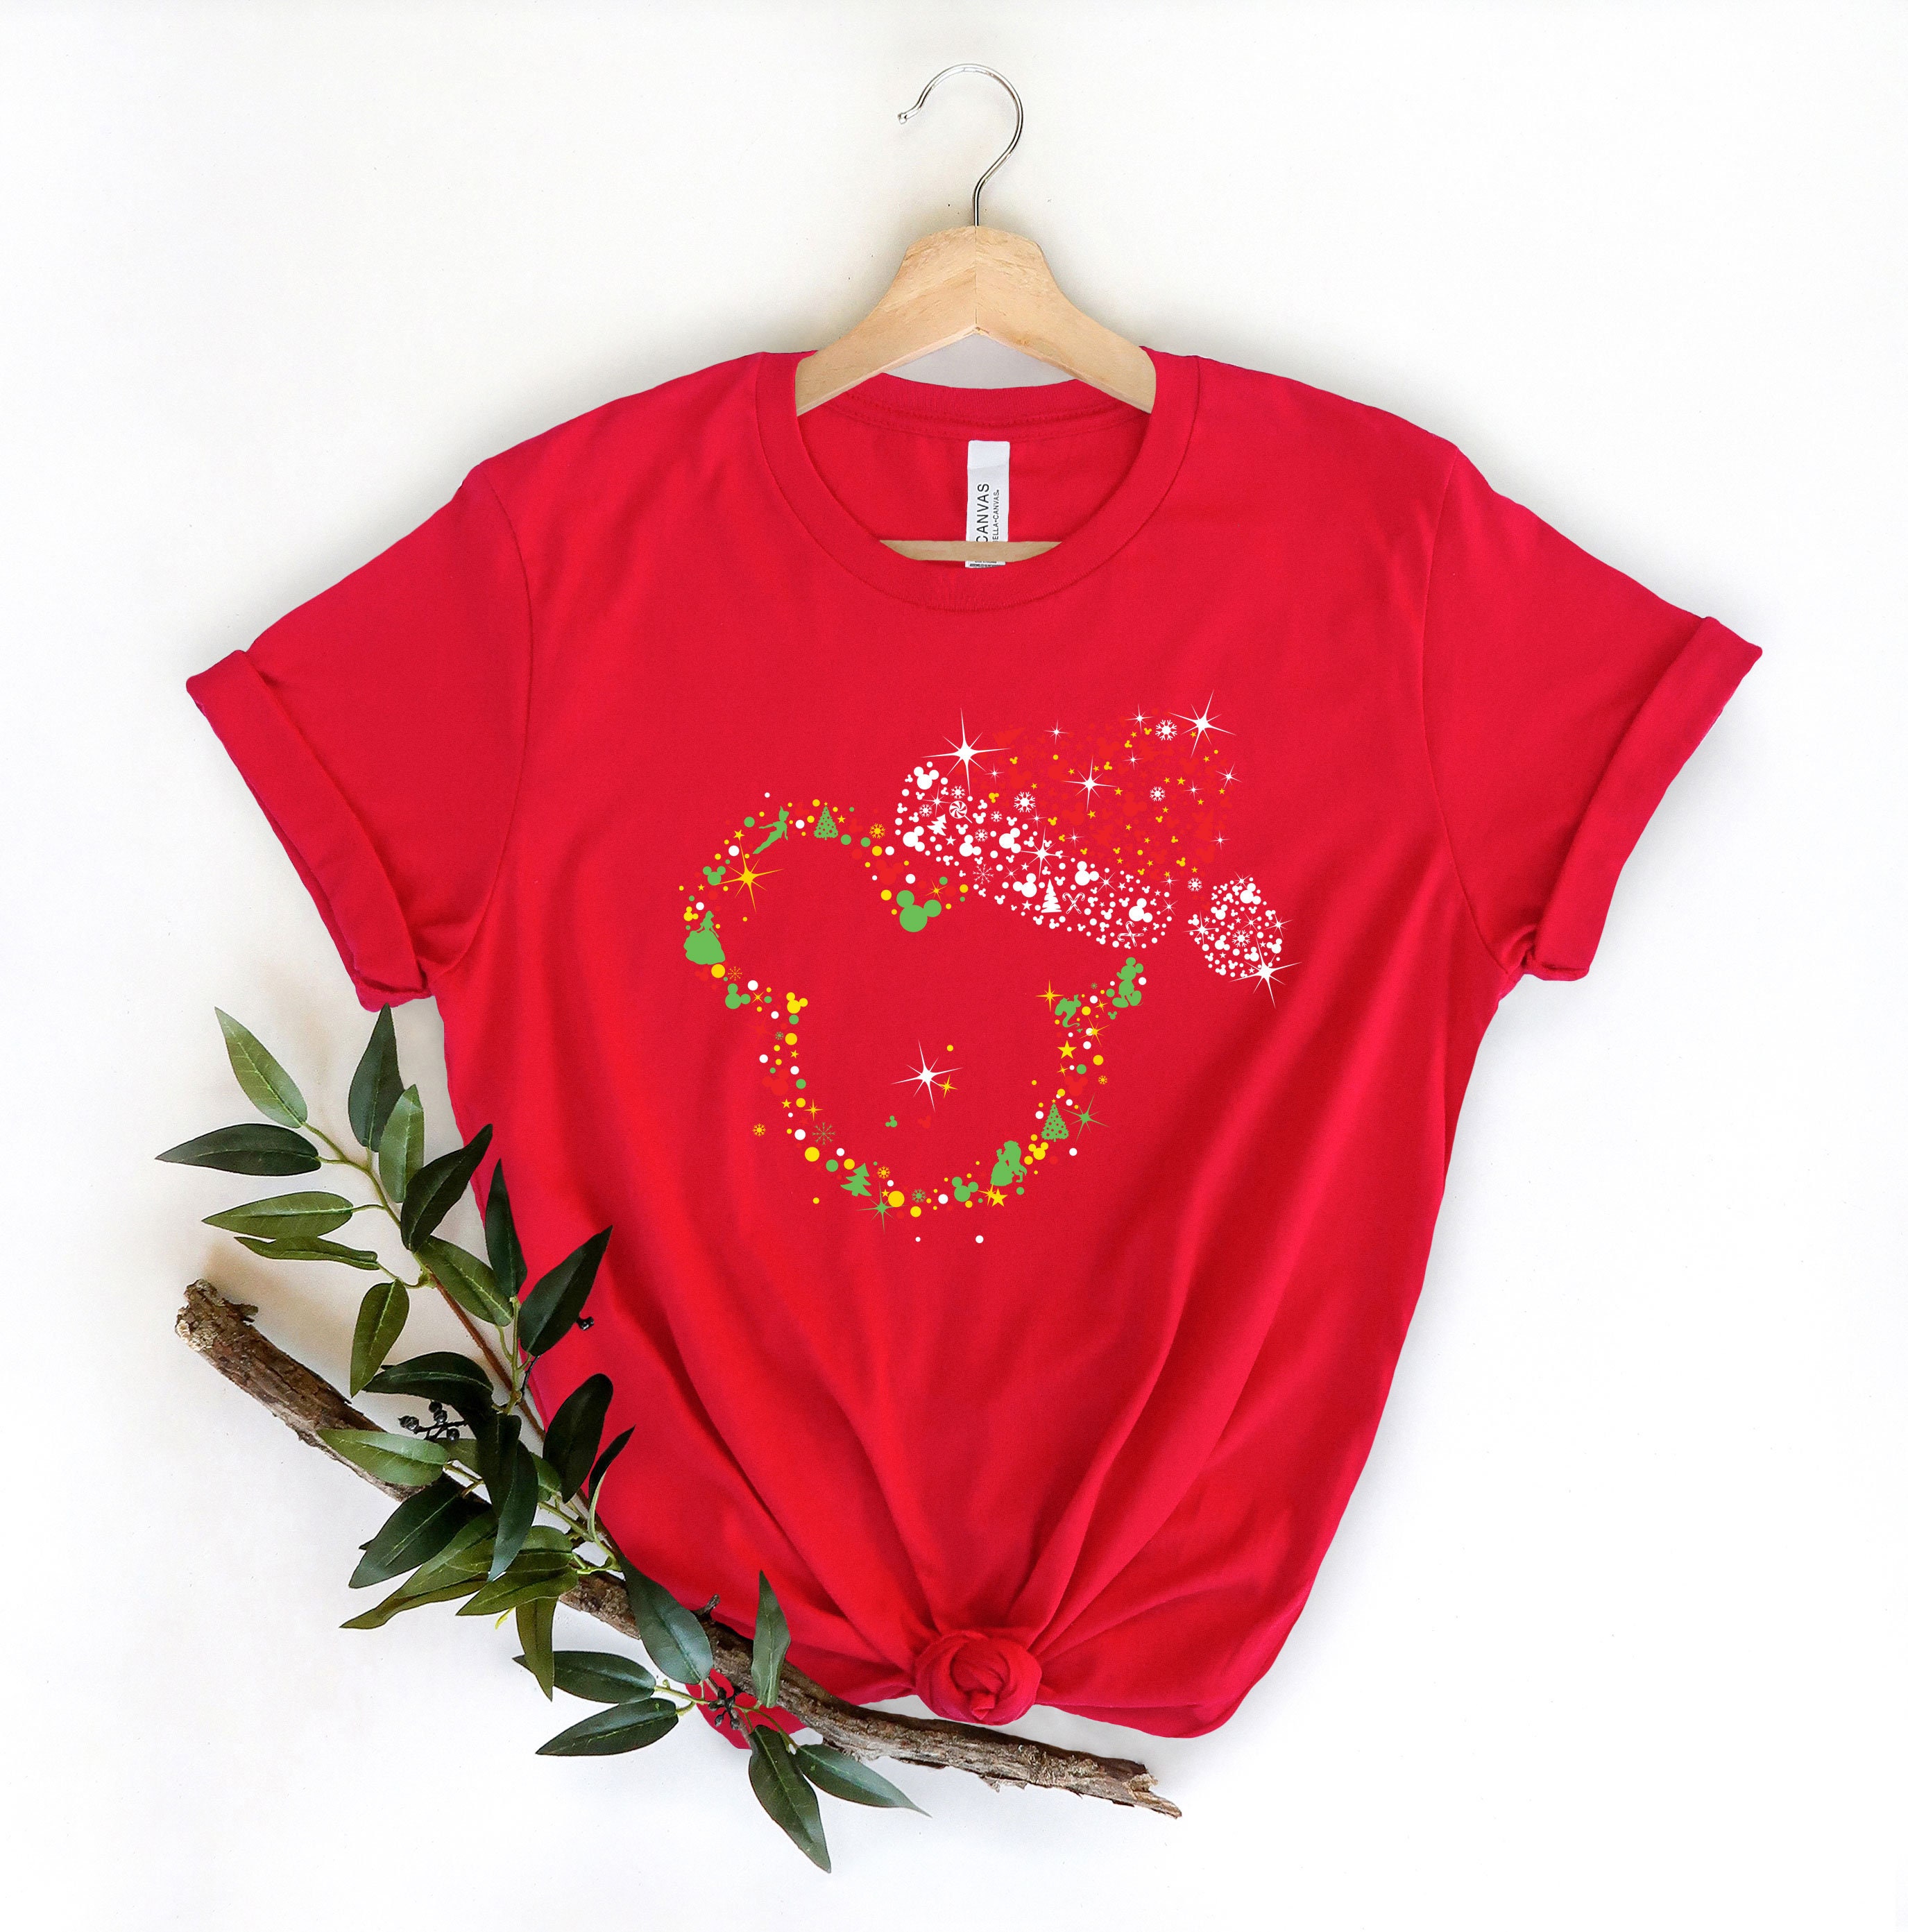 Discover Mickey Christmas Party Shirt,Disney Christmas Sweatshirt,Disney Christmas Gifts,Christmas,Disney World Shirt,Christmas Disney Family shirt